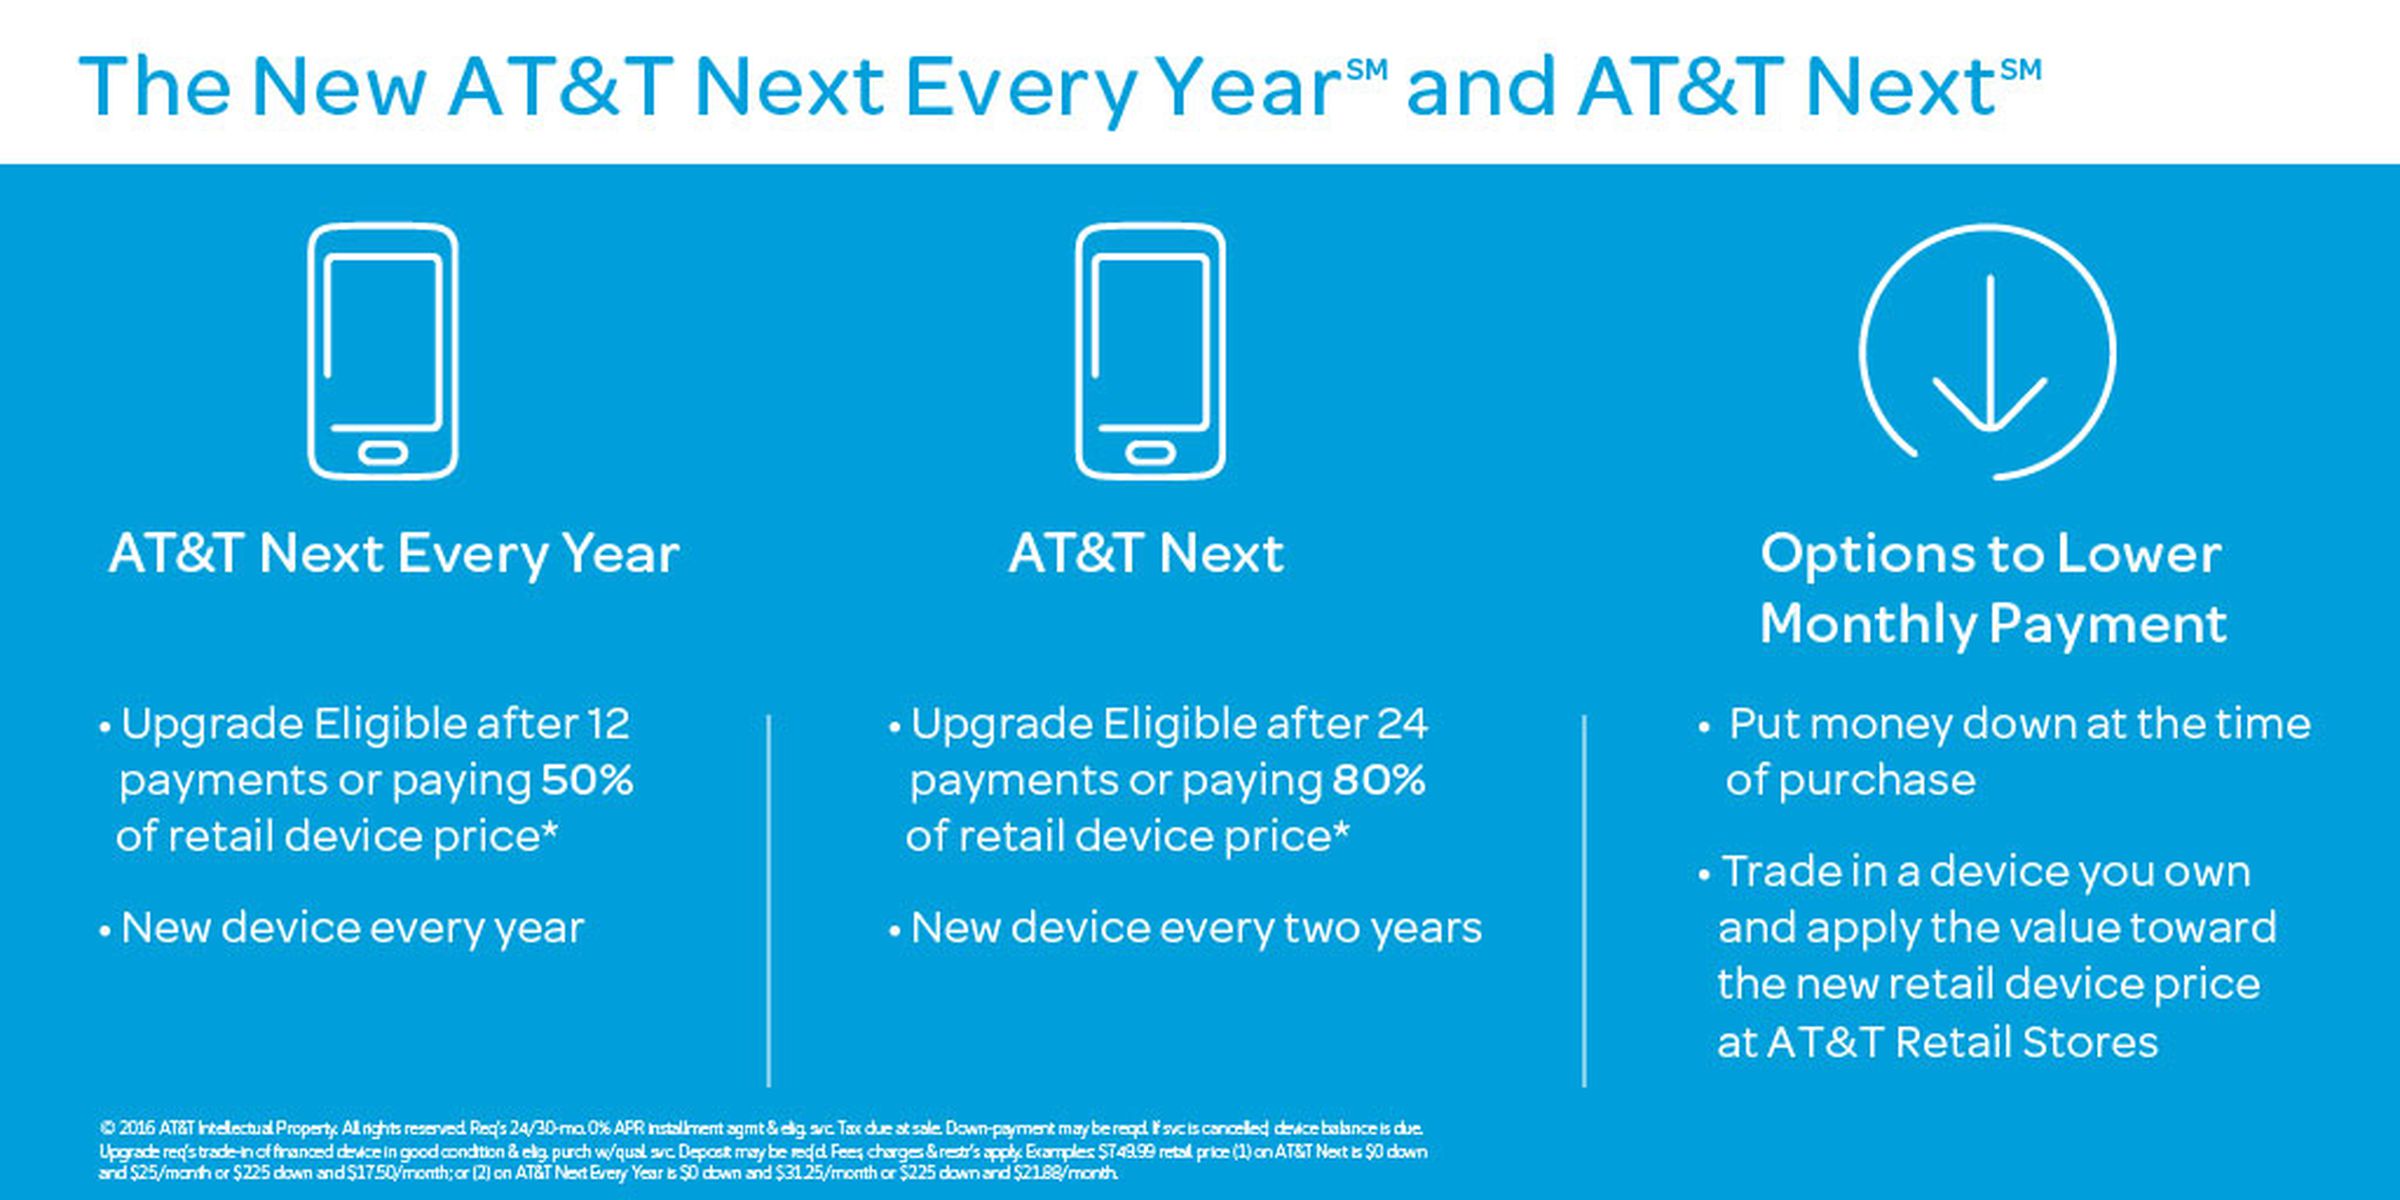 AT&T Next plans